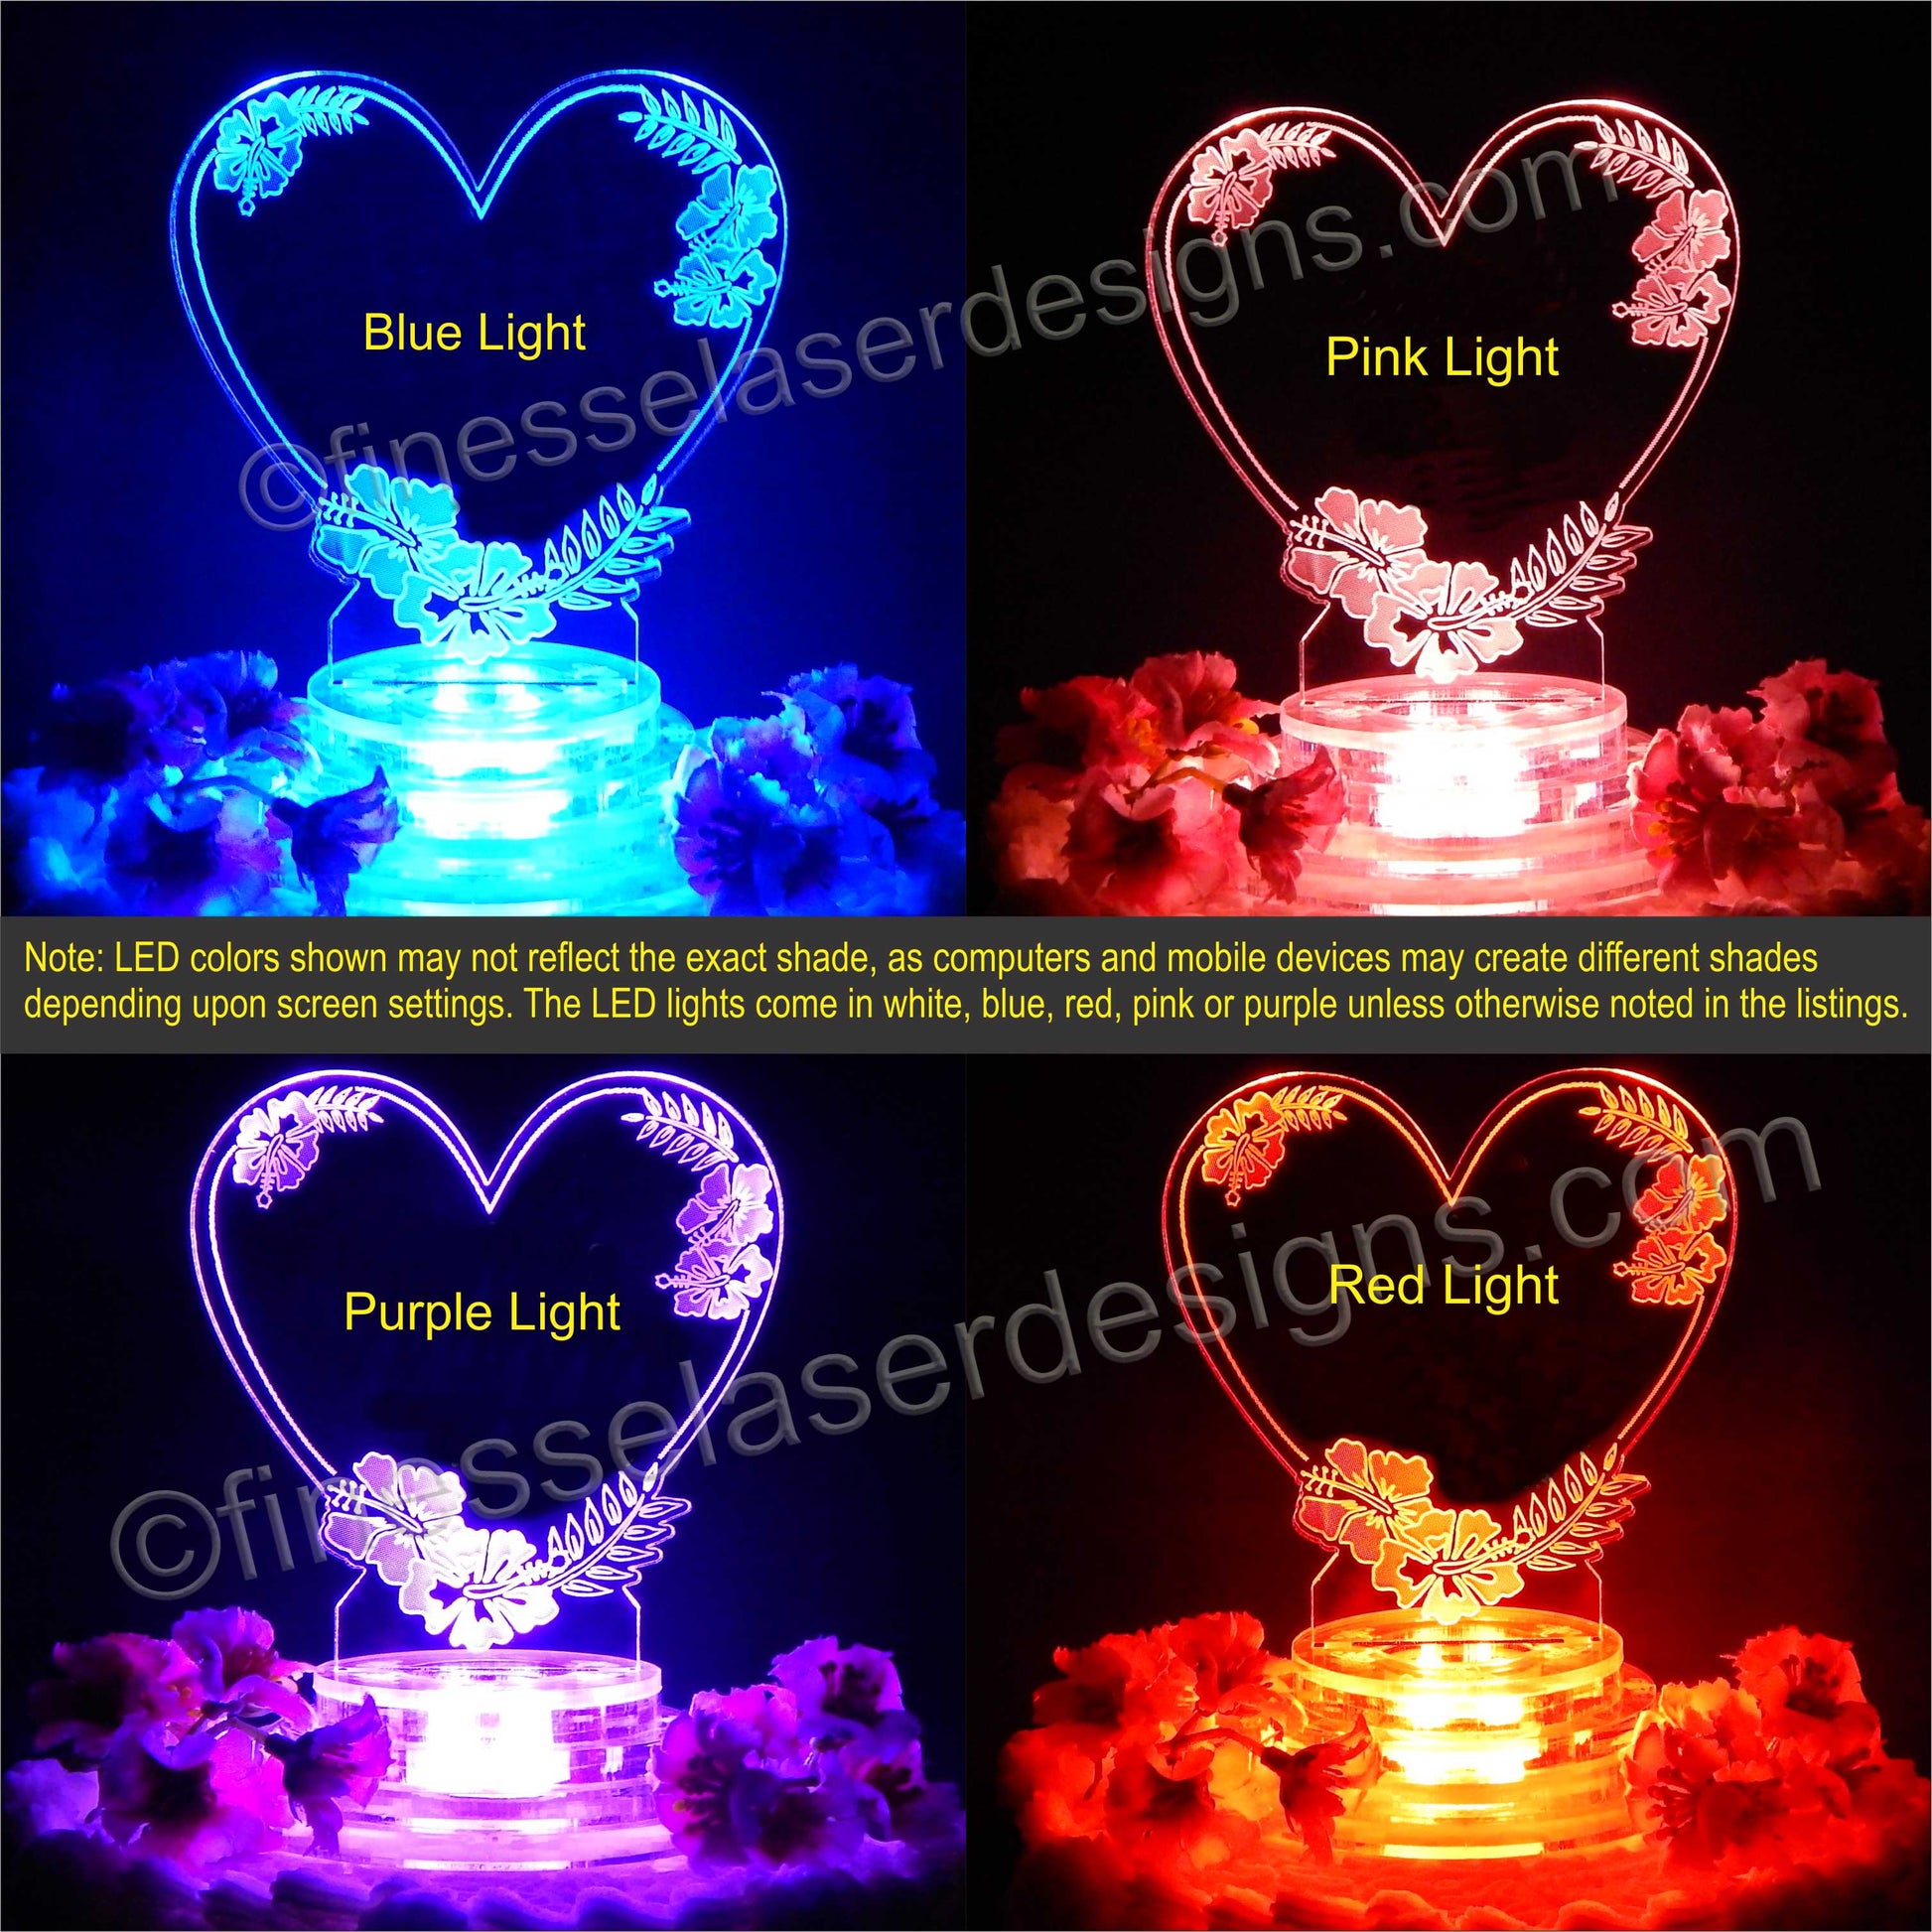 color light views of a heart shaped acrylicy cake topper with an hibiscus flower design shown in blue, pink, purple and red lighting